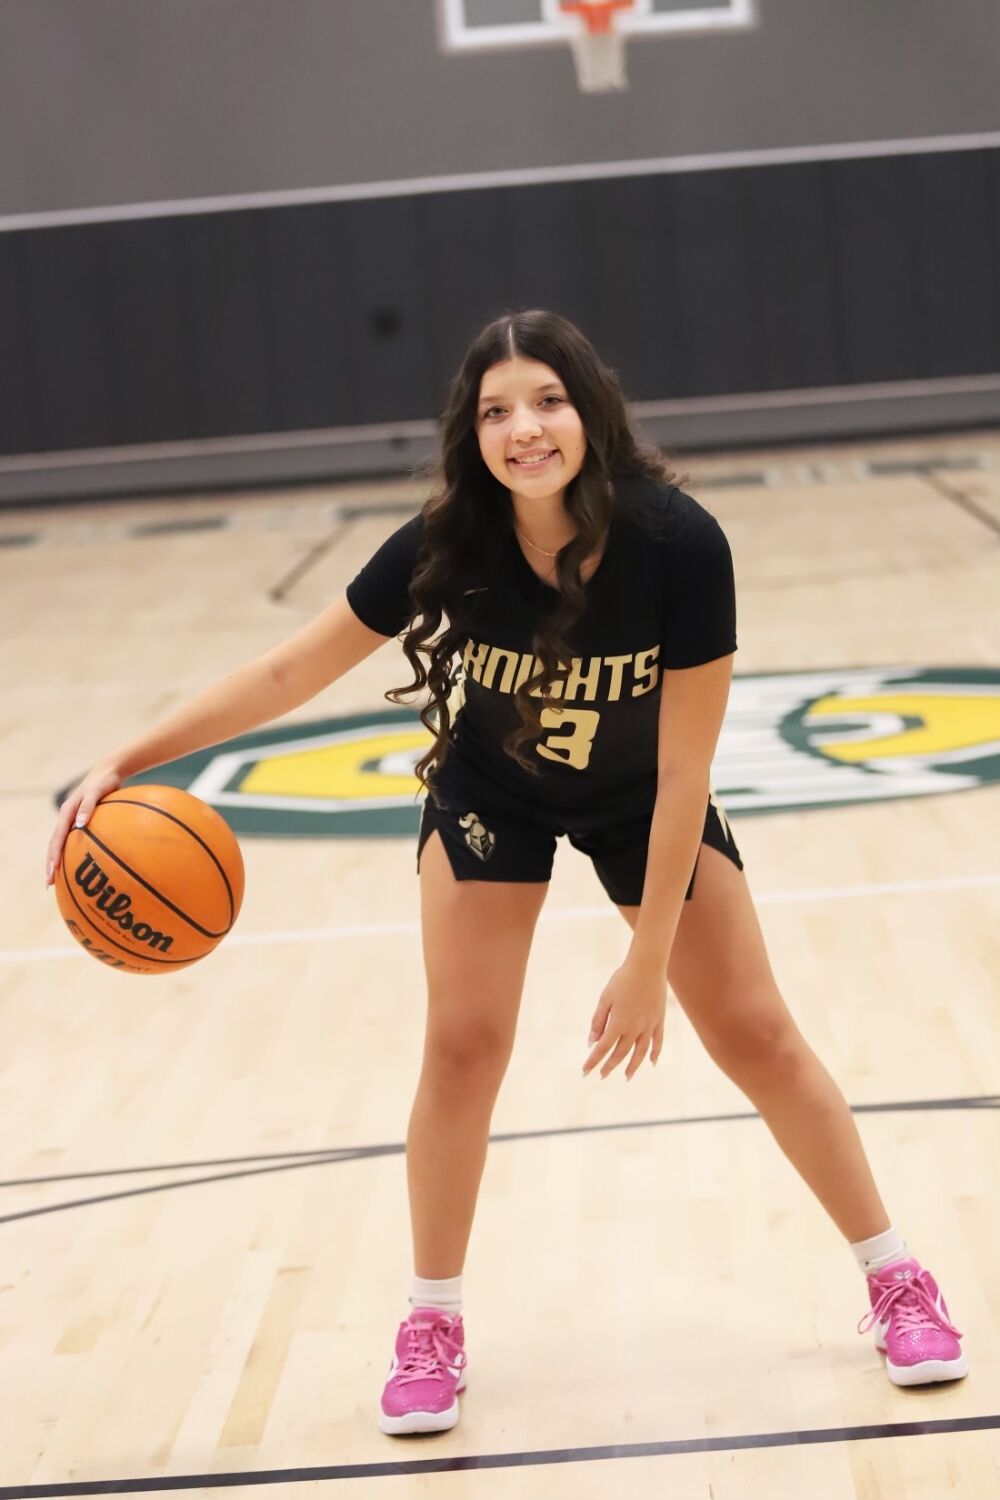 Ontario Christian's Dejah Saldivar breaks girls' state record for most threes in a game